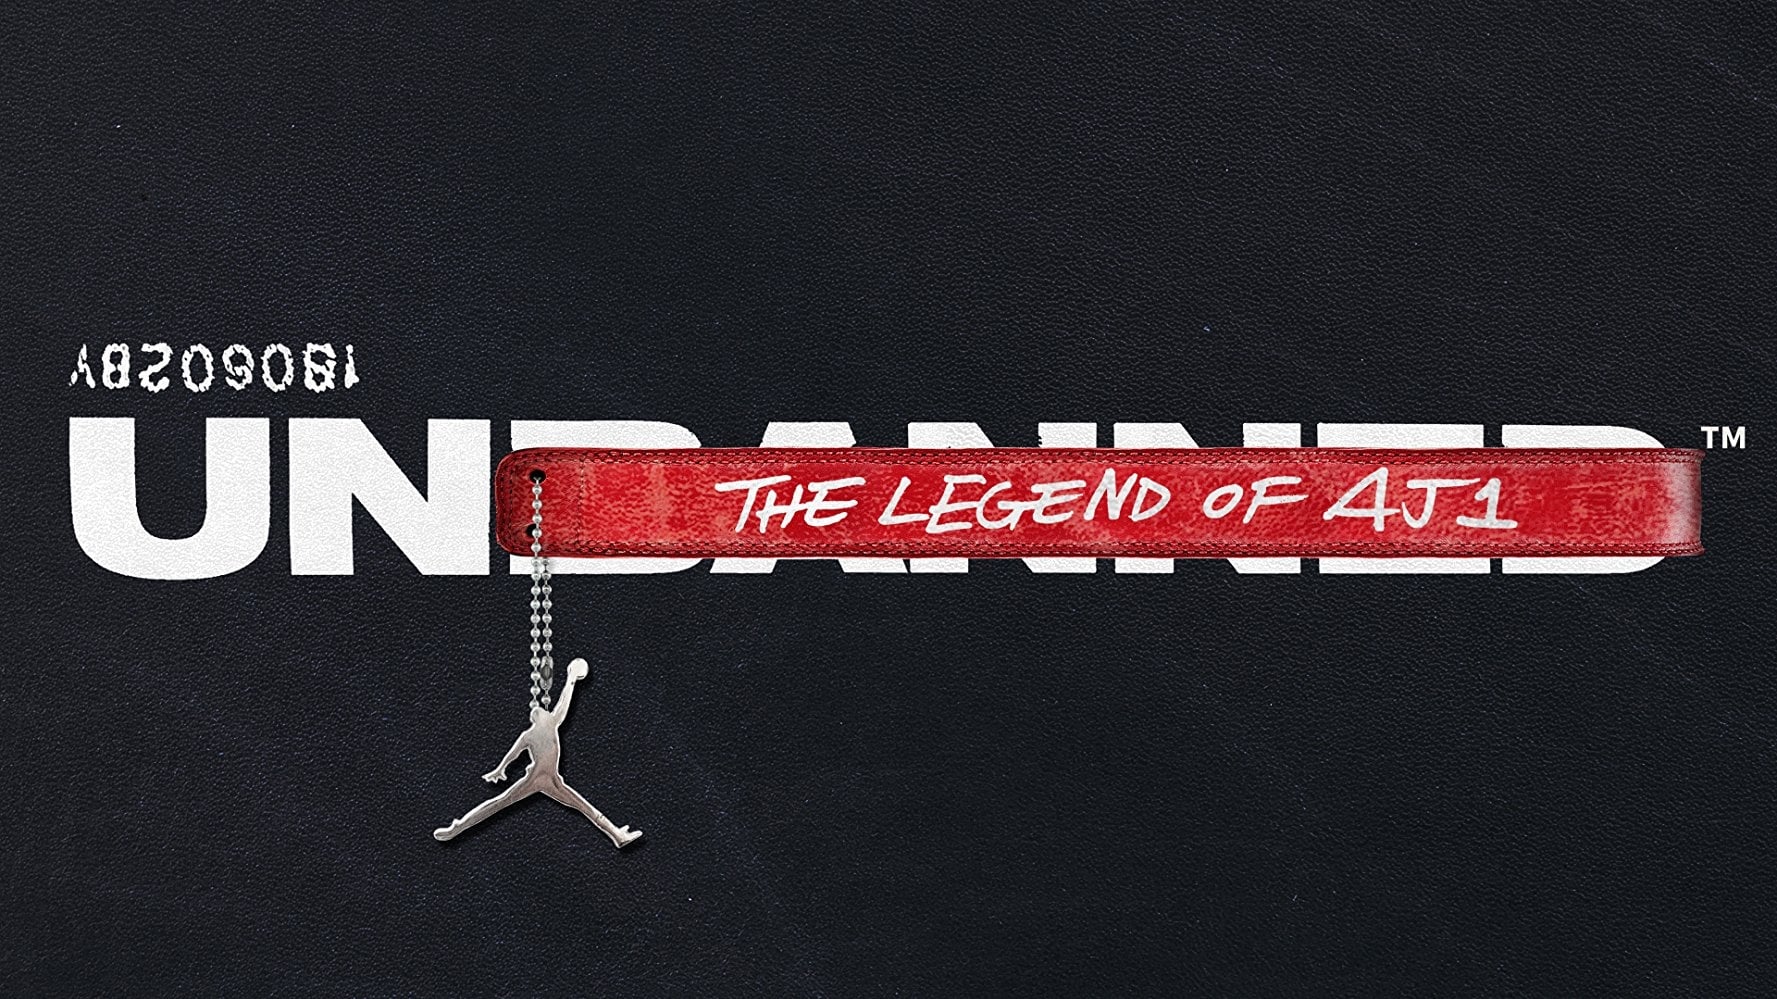 Unbanned: The Legend of AJ1